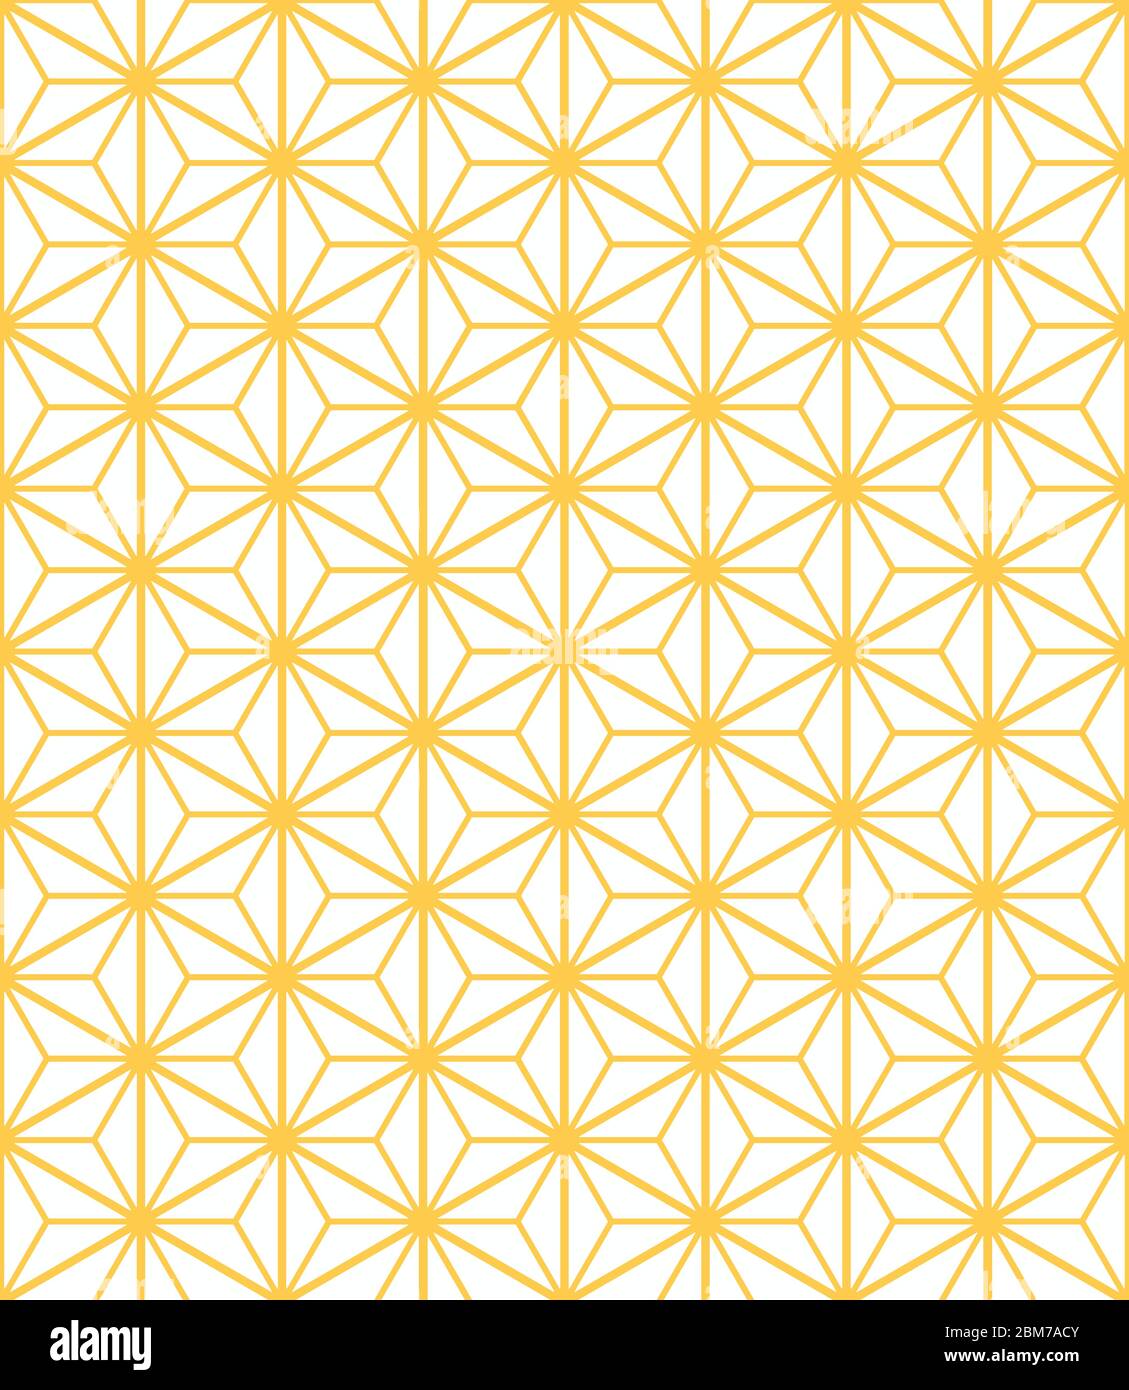 Seamless elegant kumiko asanoha traditional Japanese pattern in golden mustard yellow color on white background. Gold geometric vector pattern. Stock Vector